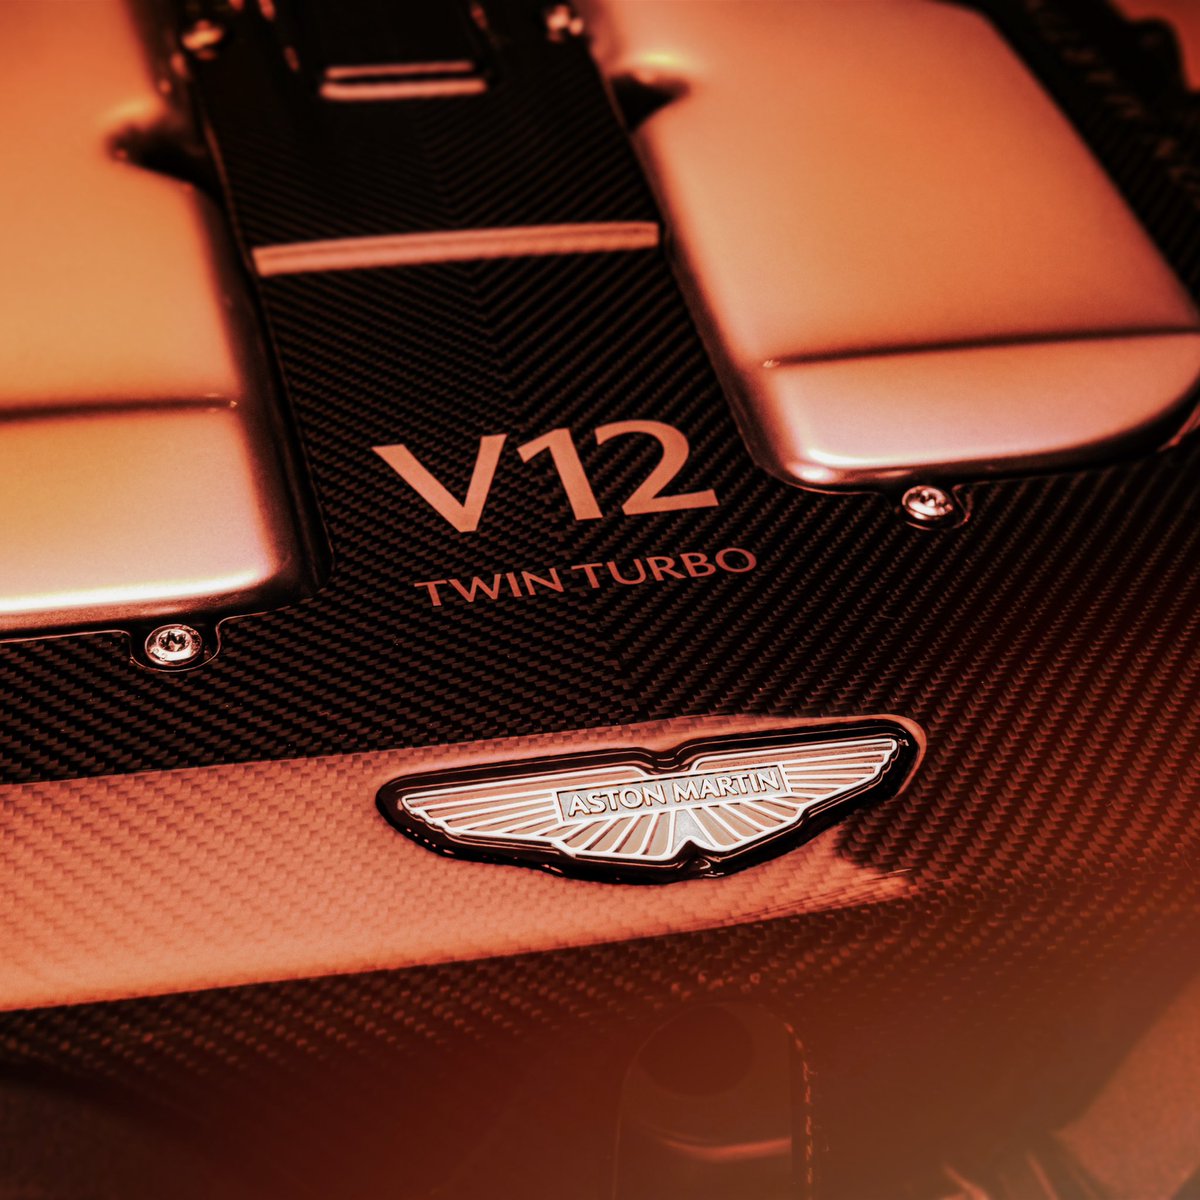 ‘It produces a mighty 824bhp and 738lb ft of torque, even more than the old V12 delivered in its most potent form.’ We’ve got first details of Aston Martin’s new V12 – due to appear in the third-gen Vanquish later this year. Read more on the Ti Blog: the-intercooler.com/library/blog/a…